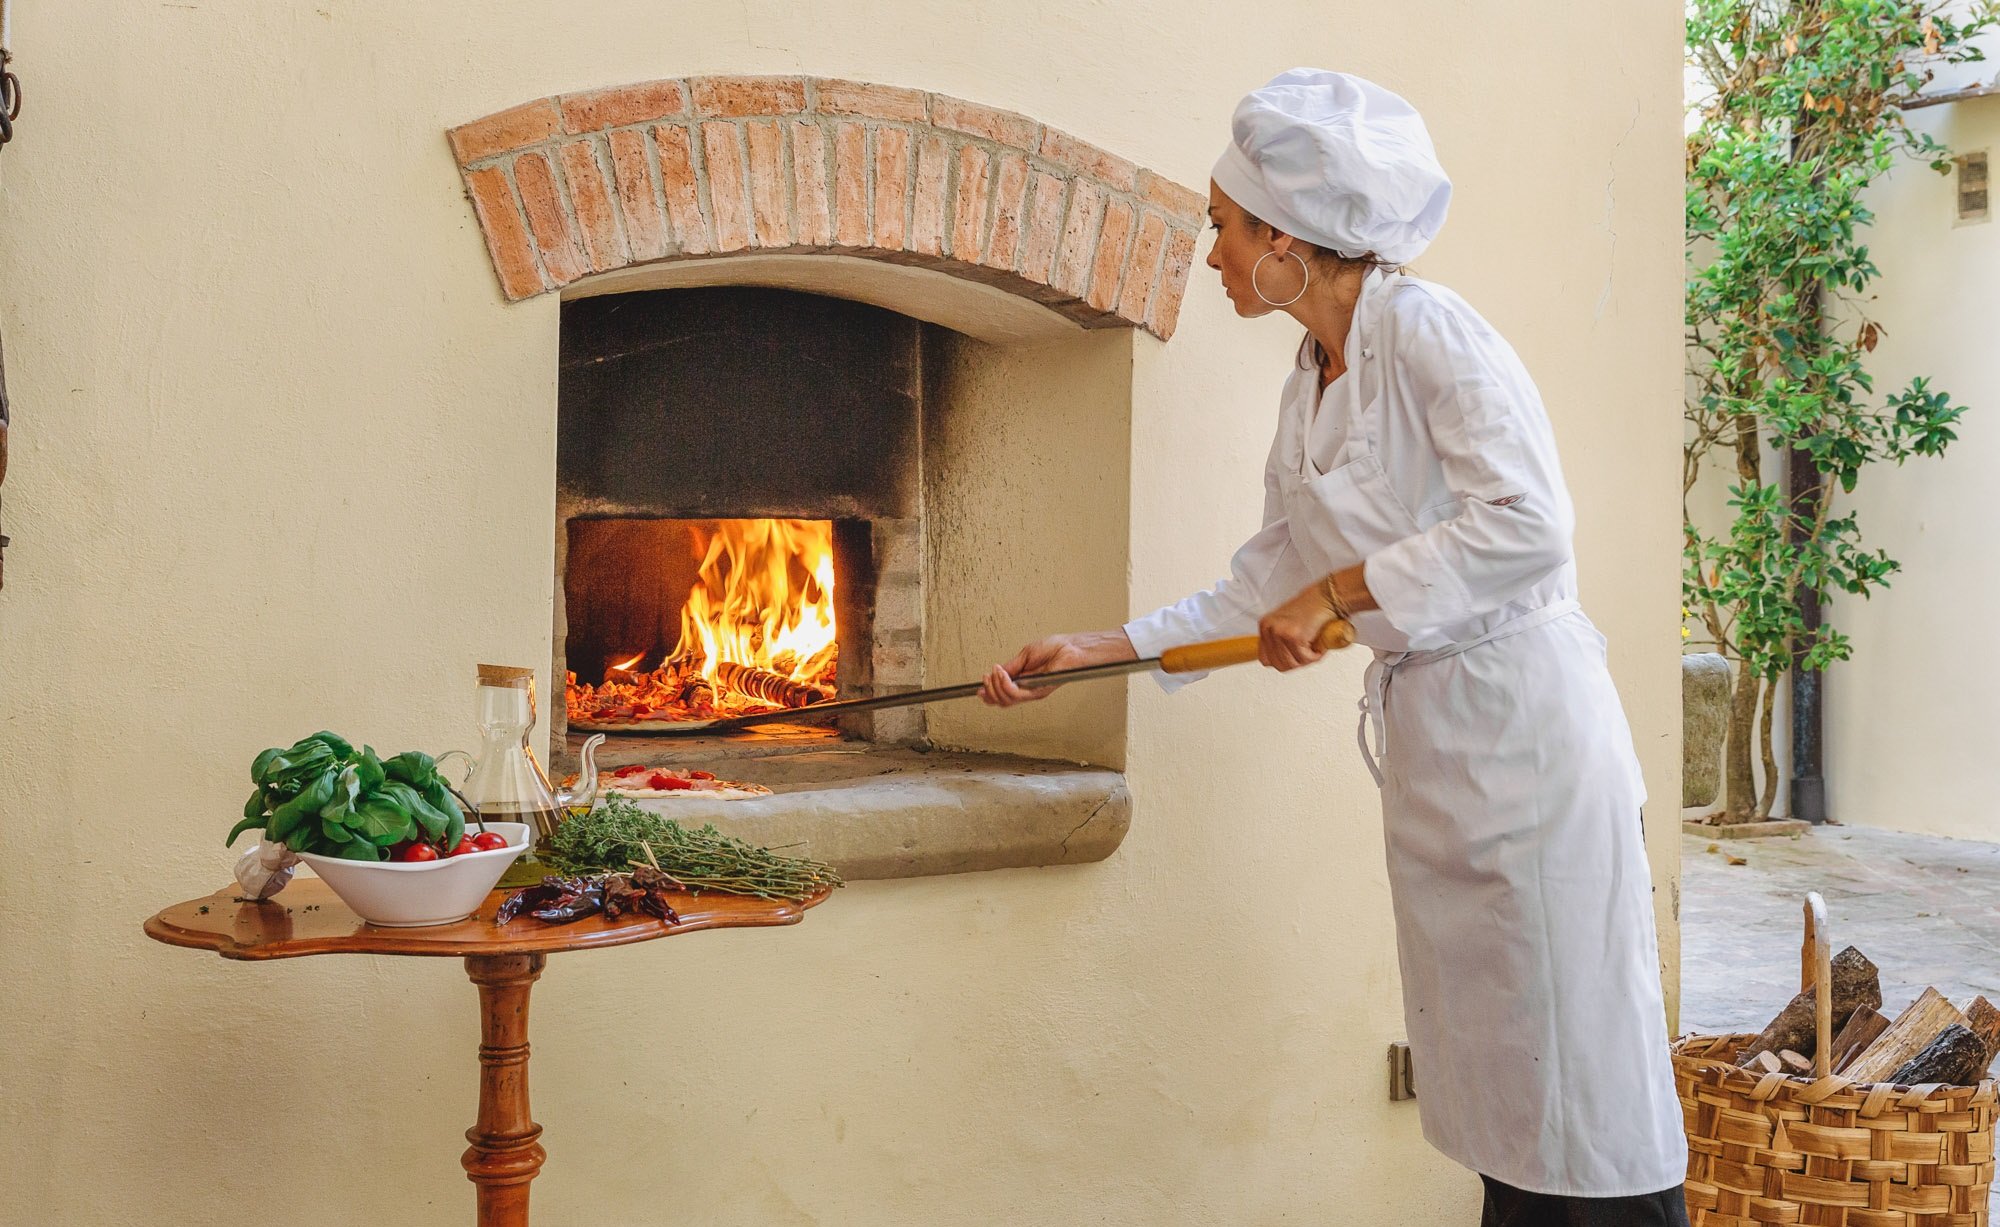 Pizza being placed into a wood fired oven